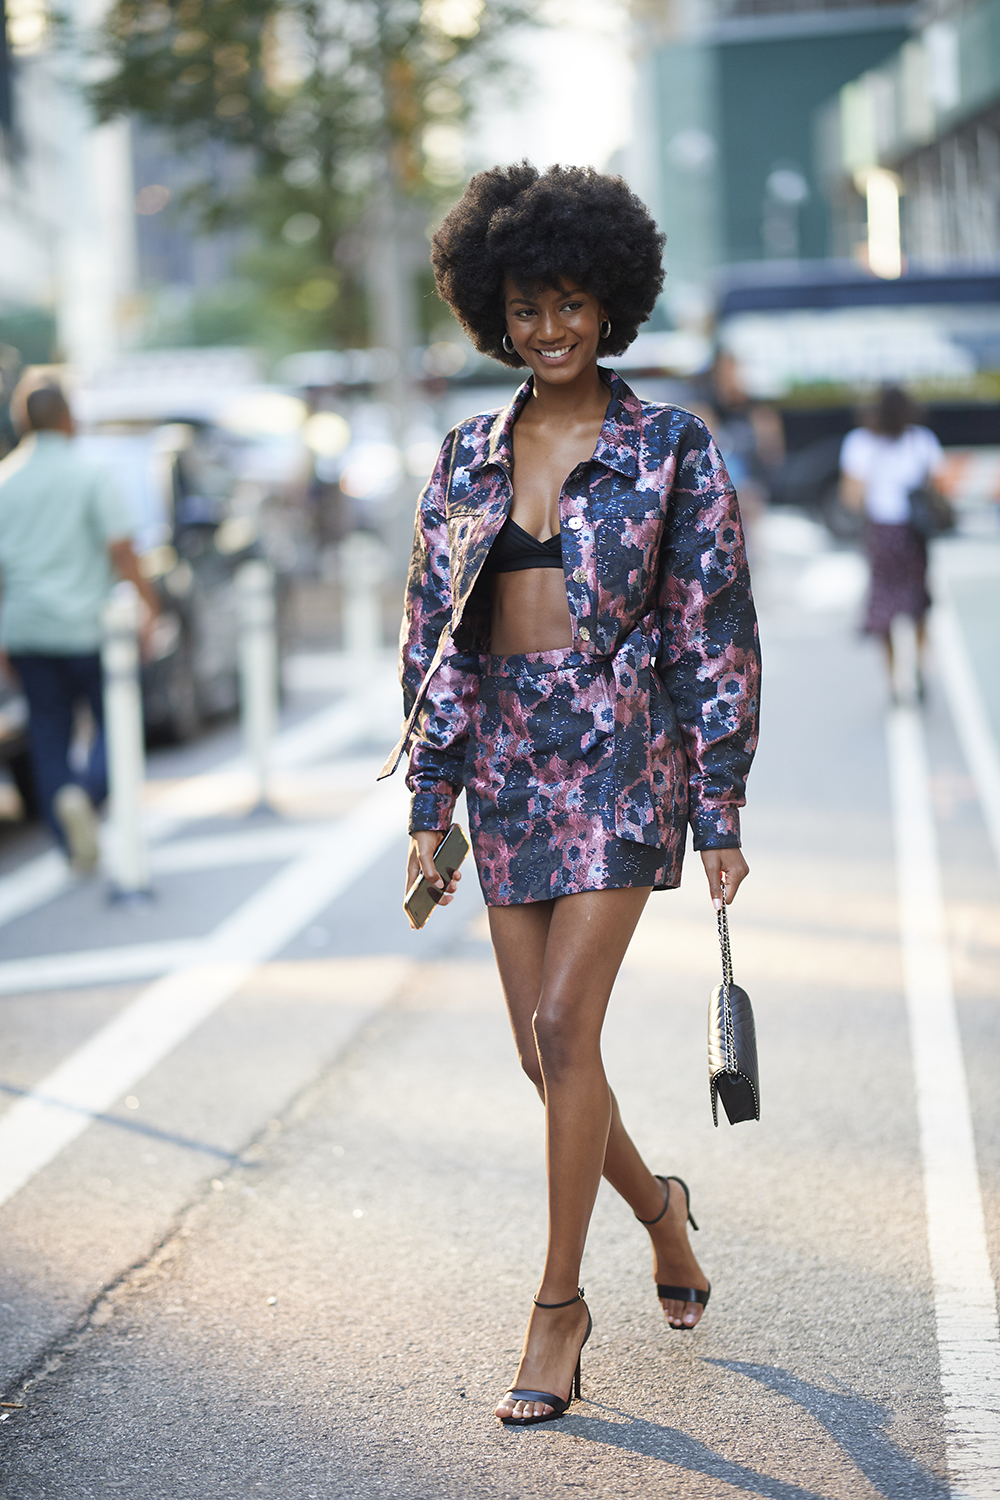 NEW YORK, NY - SEPTEMBER 05: Model Ebonee Davis attends the casting callbacks for the 2018 Victoria's Secret Fashion Show in Midtown on September 5, 2018 in New York City. (Photo by Timur Emek/Getty Images)